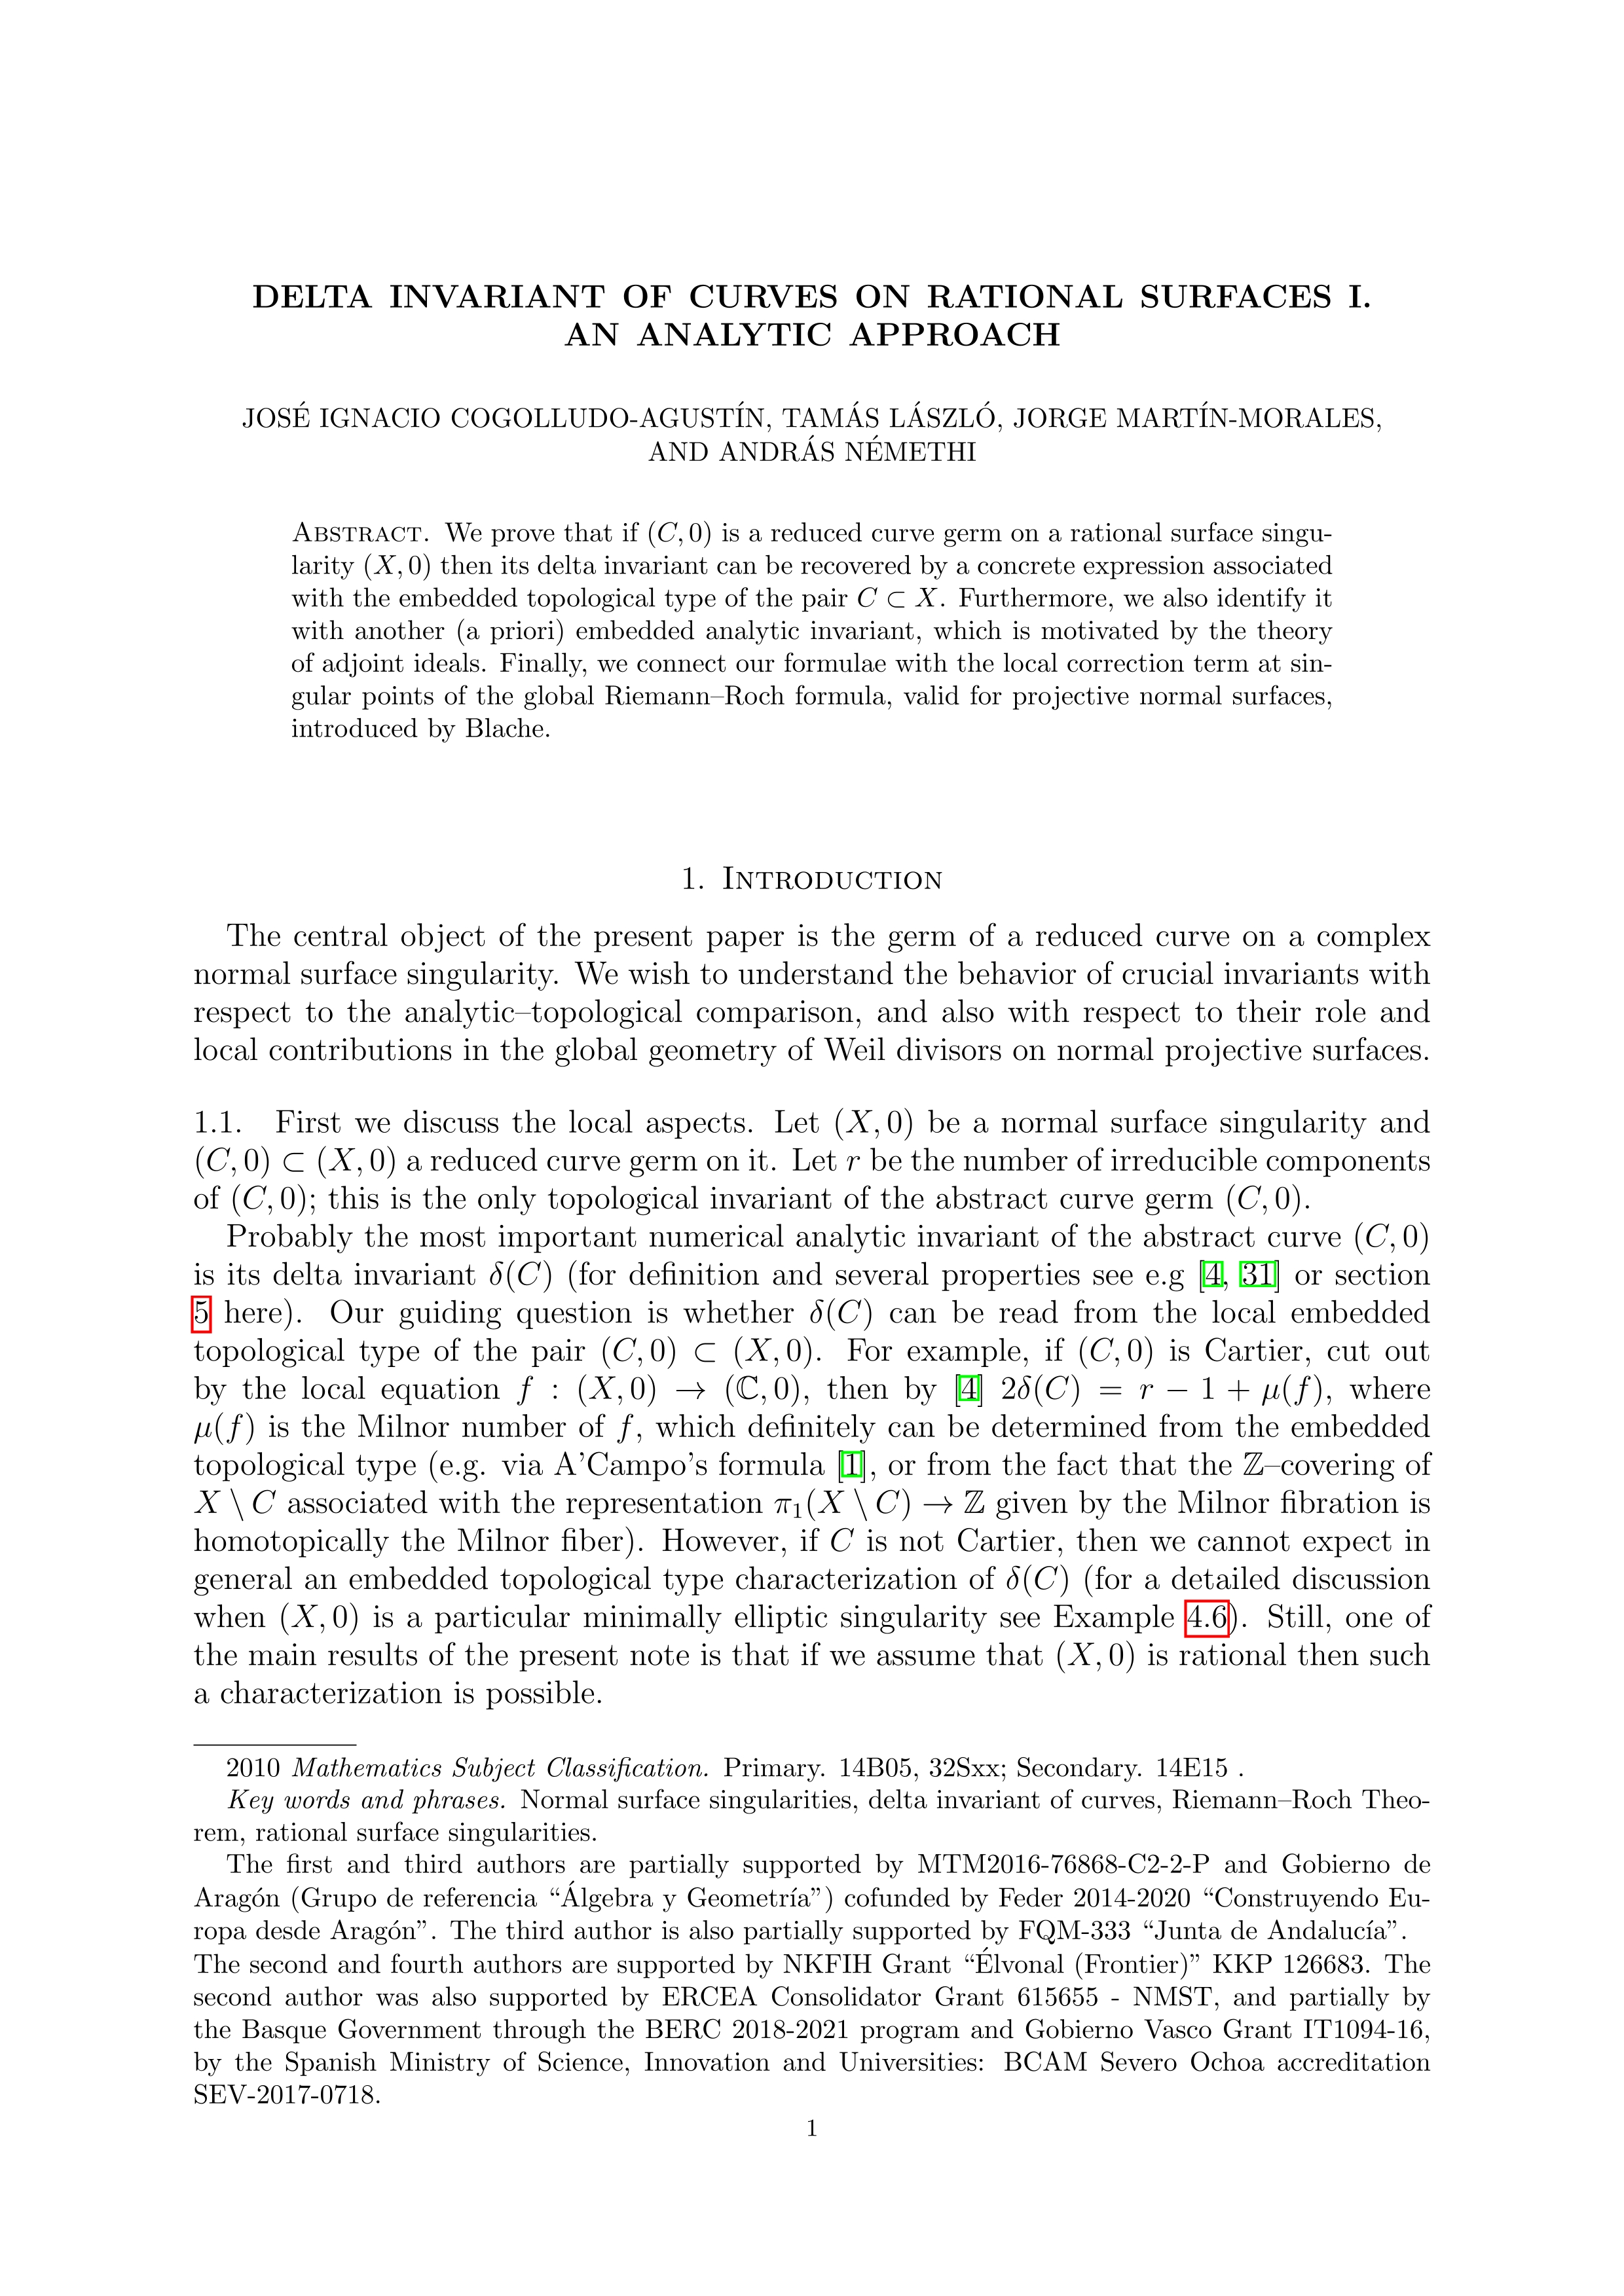 Delta invariant of curves on rational surfaces I. An analytic approach